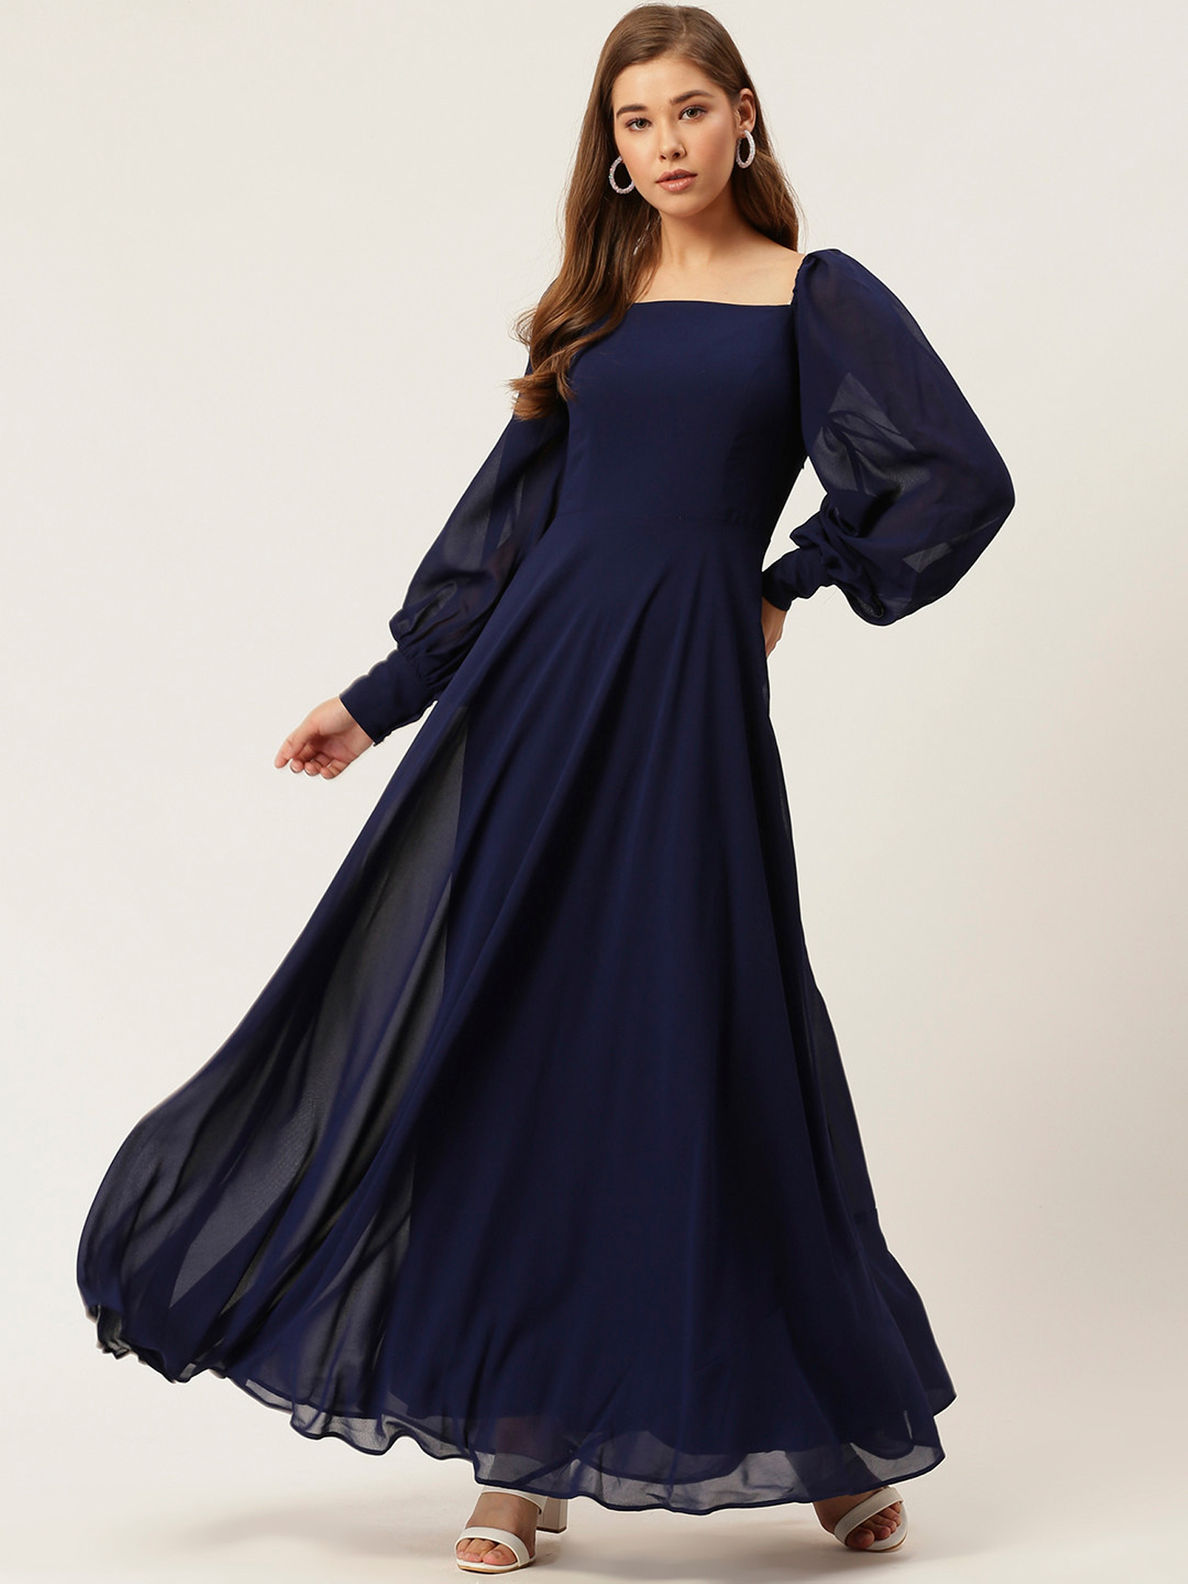 Buy Twenty Dresses by Nykaa Fashion Delighted To See You Dress online